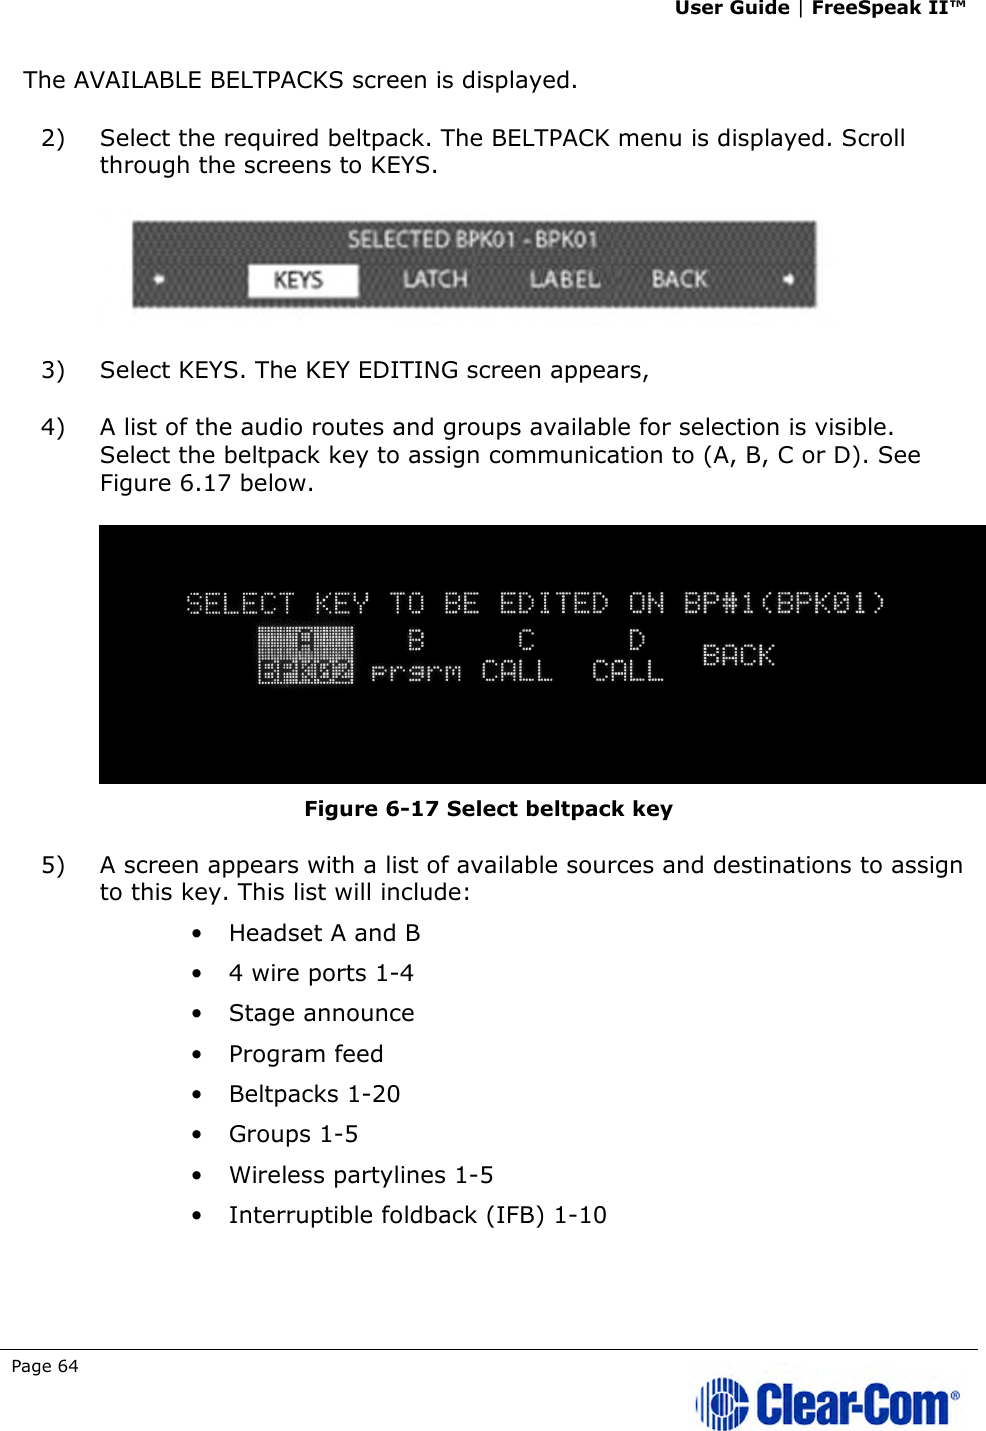 User Guide | FreeSpeak II™  Page 64   The AVAILABLE BELTPACKS screen is displayed. 2) Select the required beltpack. The BELTPACK menu is displayed. Scroll through the screens to KEYS.   3) Select KEYS. The KEY EDITING screen appears,  4) A list of the audio routes and groups available for selection is visible. Select the beltpack key to assign communication to (A, B, C or D). See Figure 6.17 below.  Figure 6-17 Select beltpack key 5) A screen appears with a list of available sources and destinations to assign to this key. This list will include: • Headset A and B • 4 wire ports 1-4 • Stage announce • Program feed • Beltpacks 1-20 • Groups 1-5 • Wireless partylines 1-5 • Interruptible foldback (IFB) 1-10 